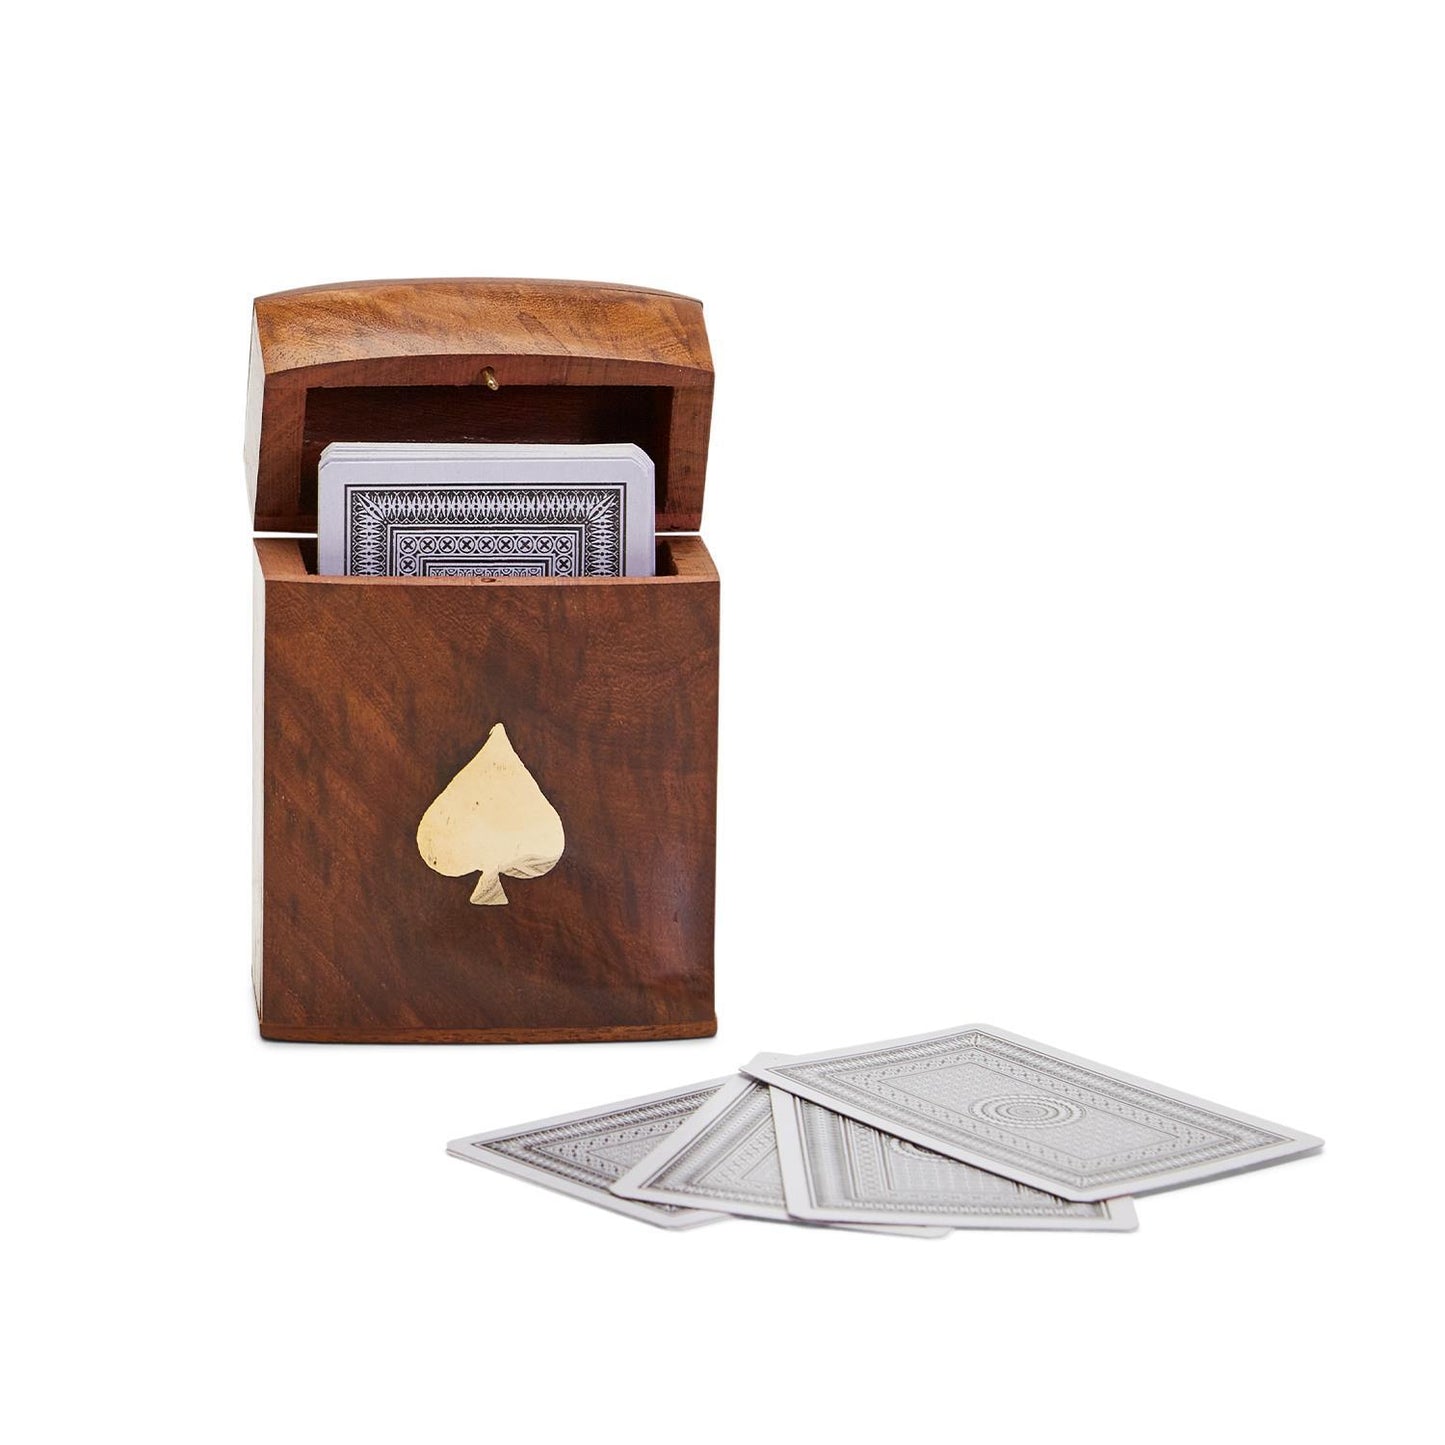 Handcrafted Wooden Playing Card Box with Cards